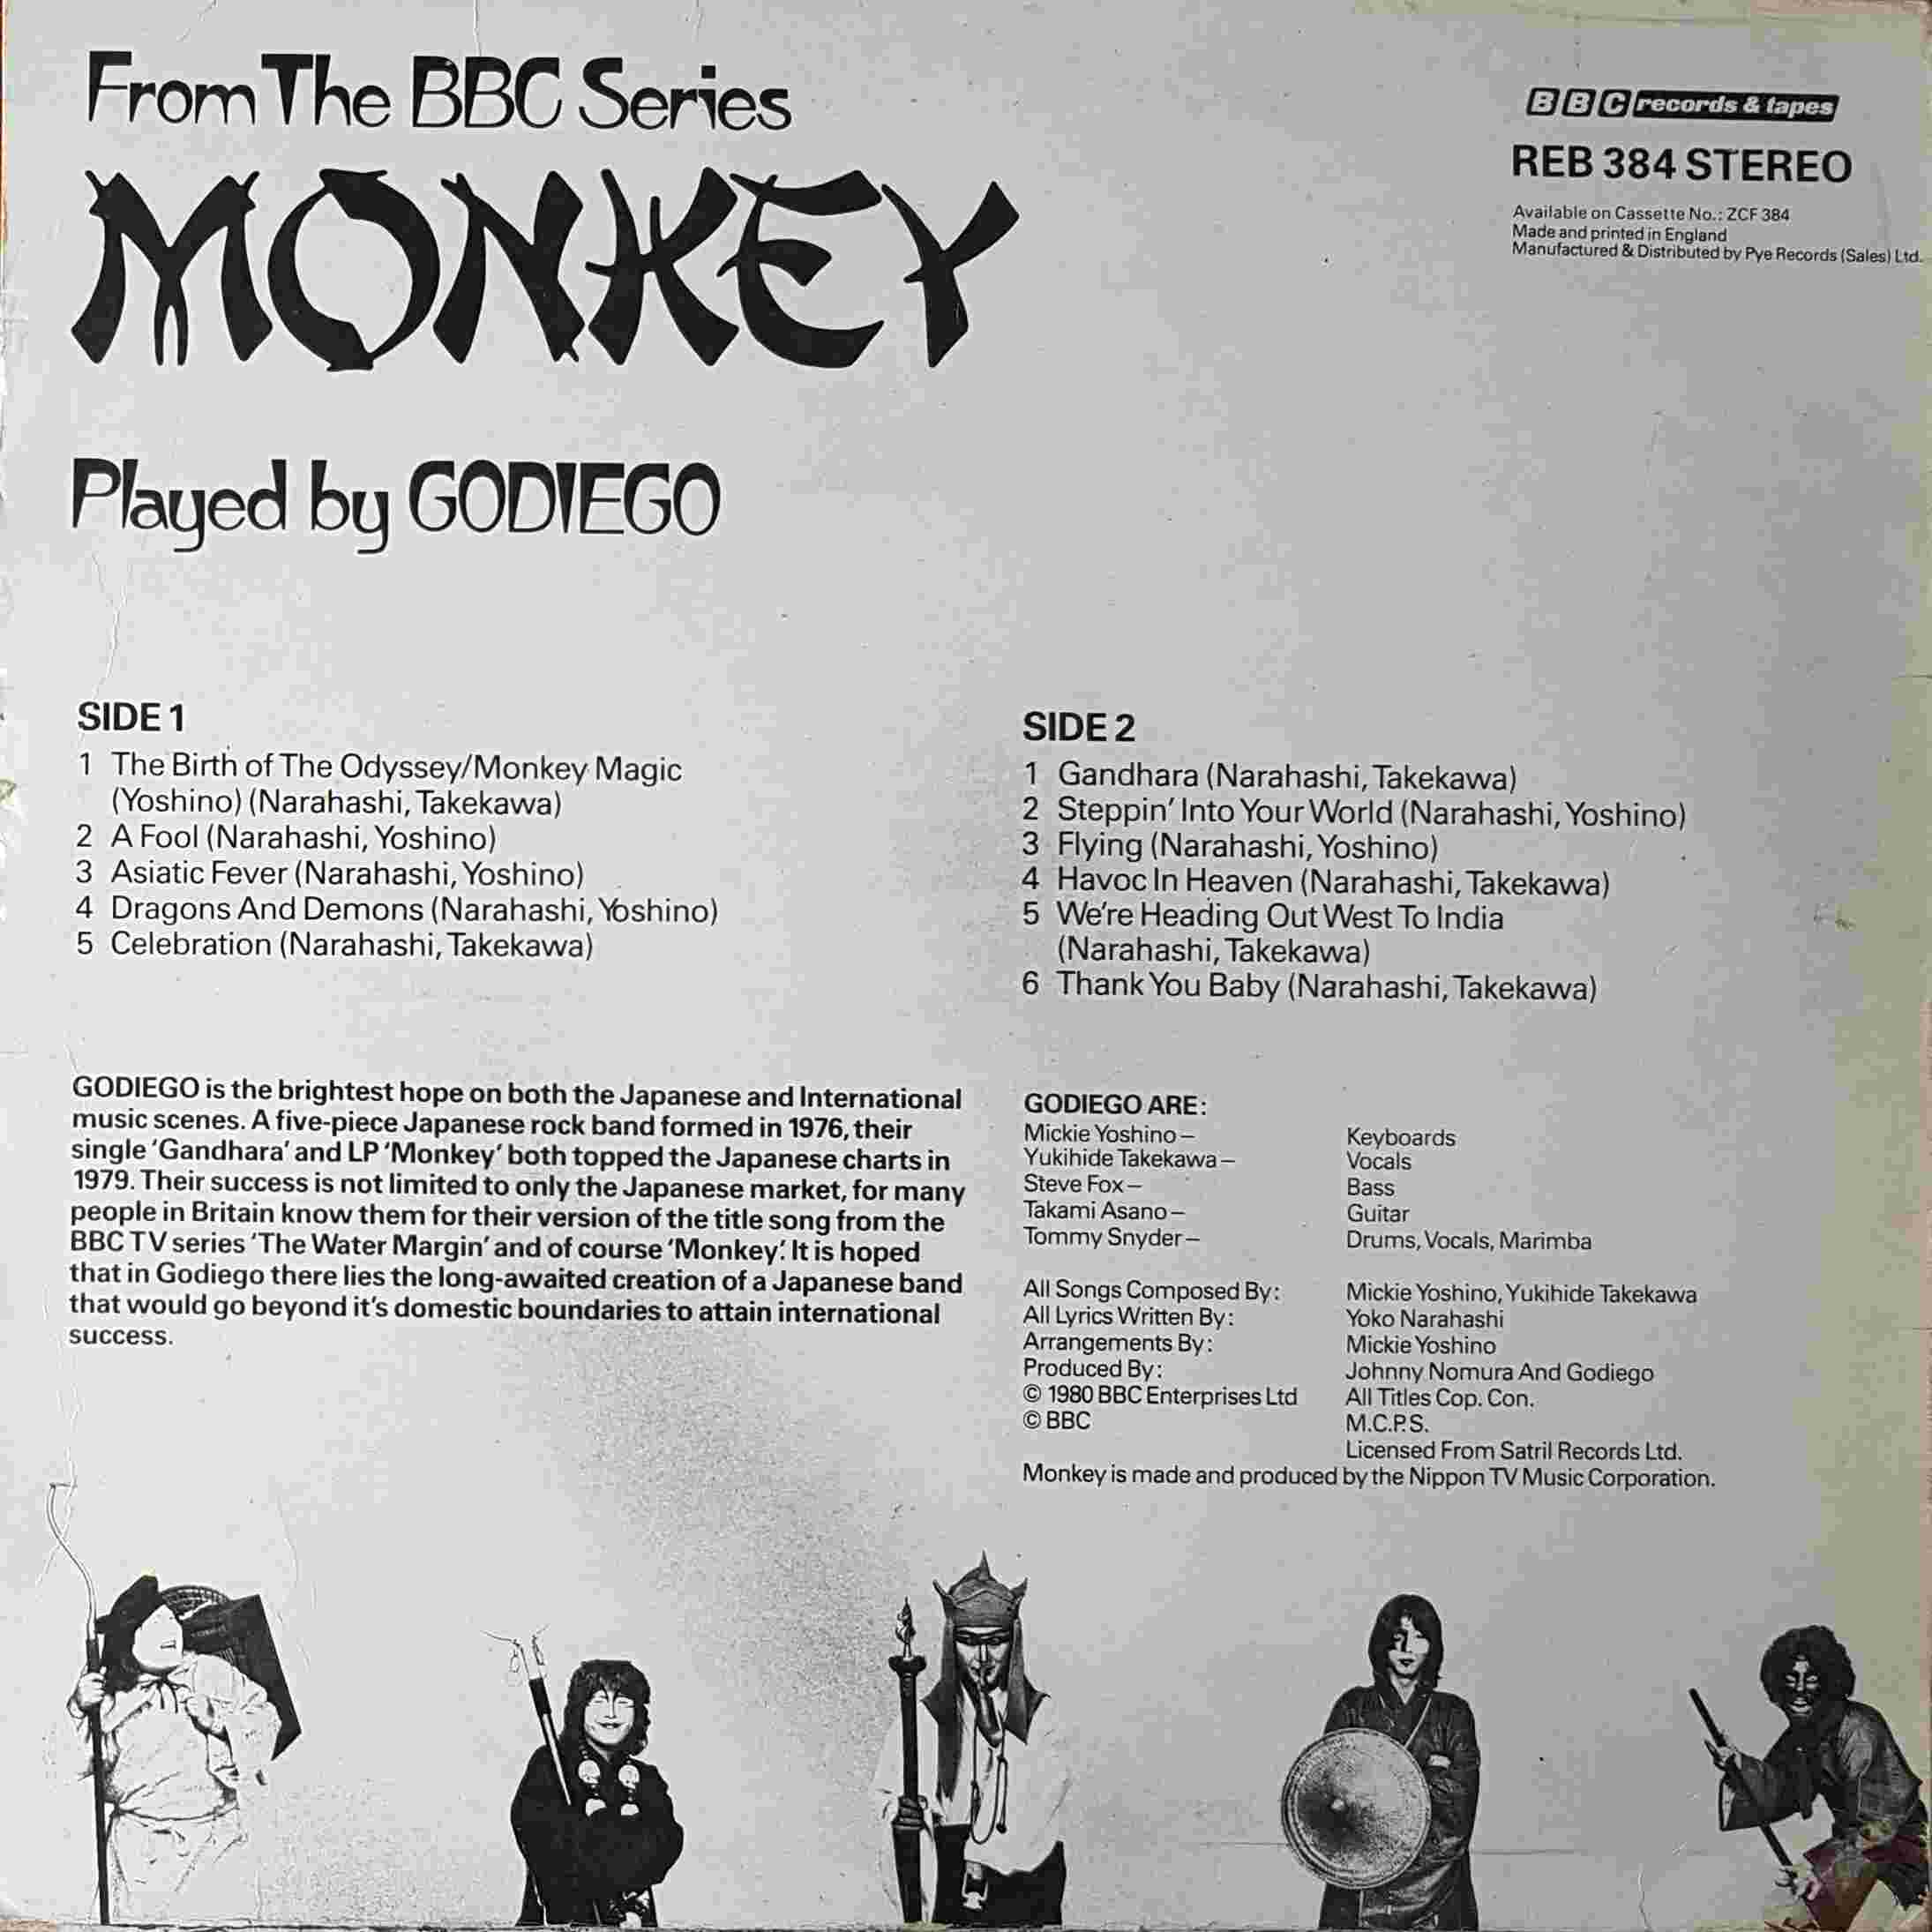 Picture of REB 384 Monkey by artist Various / Godiego from the BBC records and Tapes library